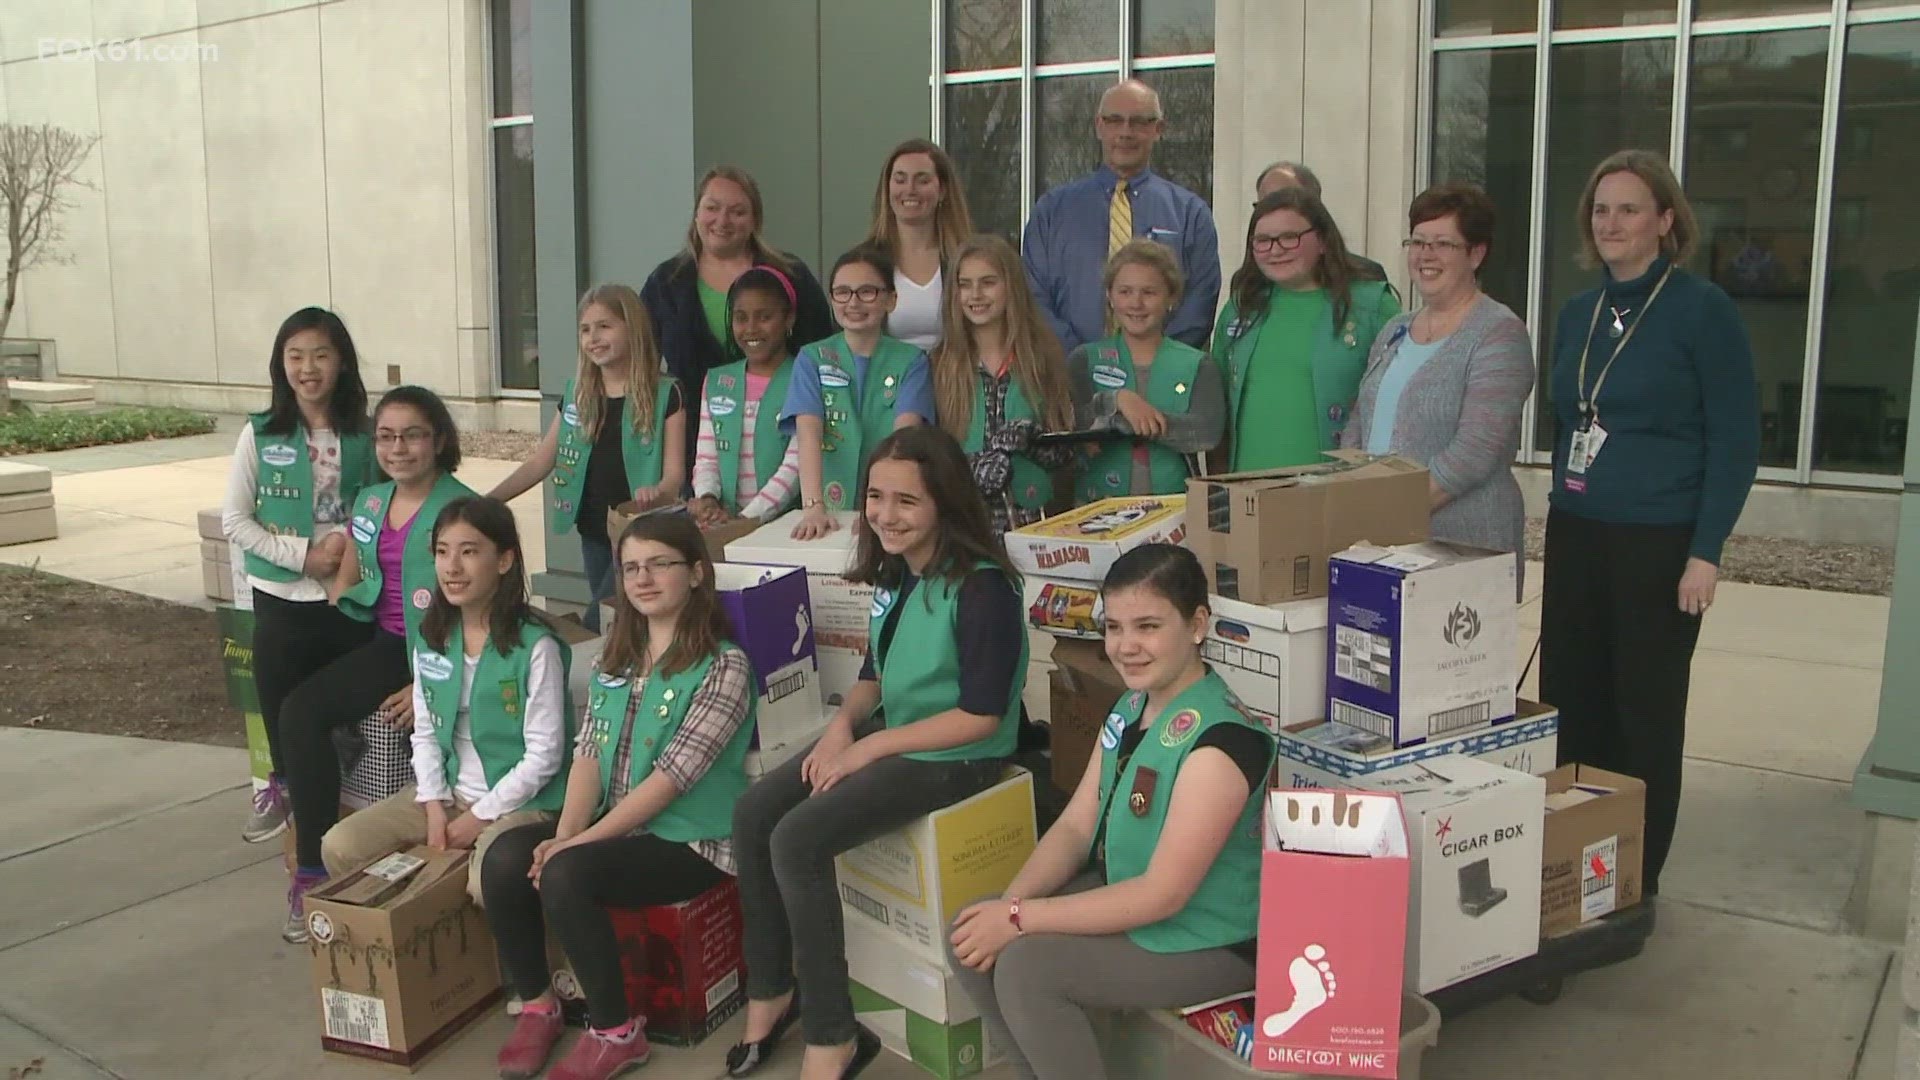 The Girl Scouts of Connecticut is hosting its annual Pumpkin Chuckin' Challenge for local Girl Scouts to learn STEM and earn an engineering badge.